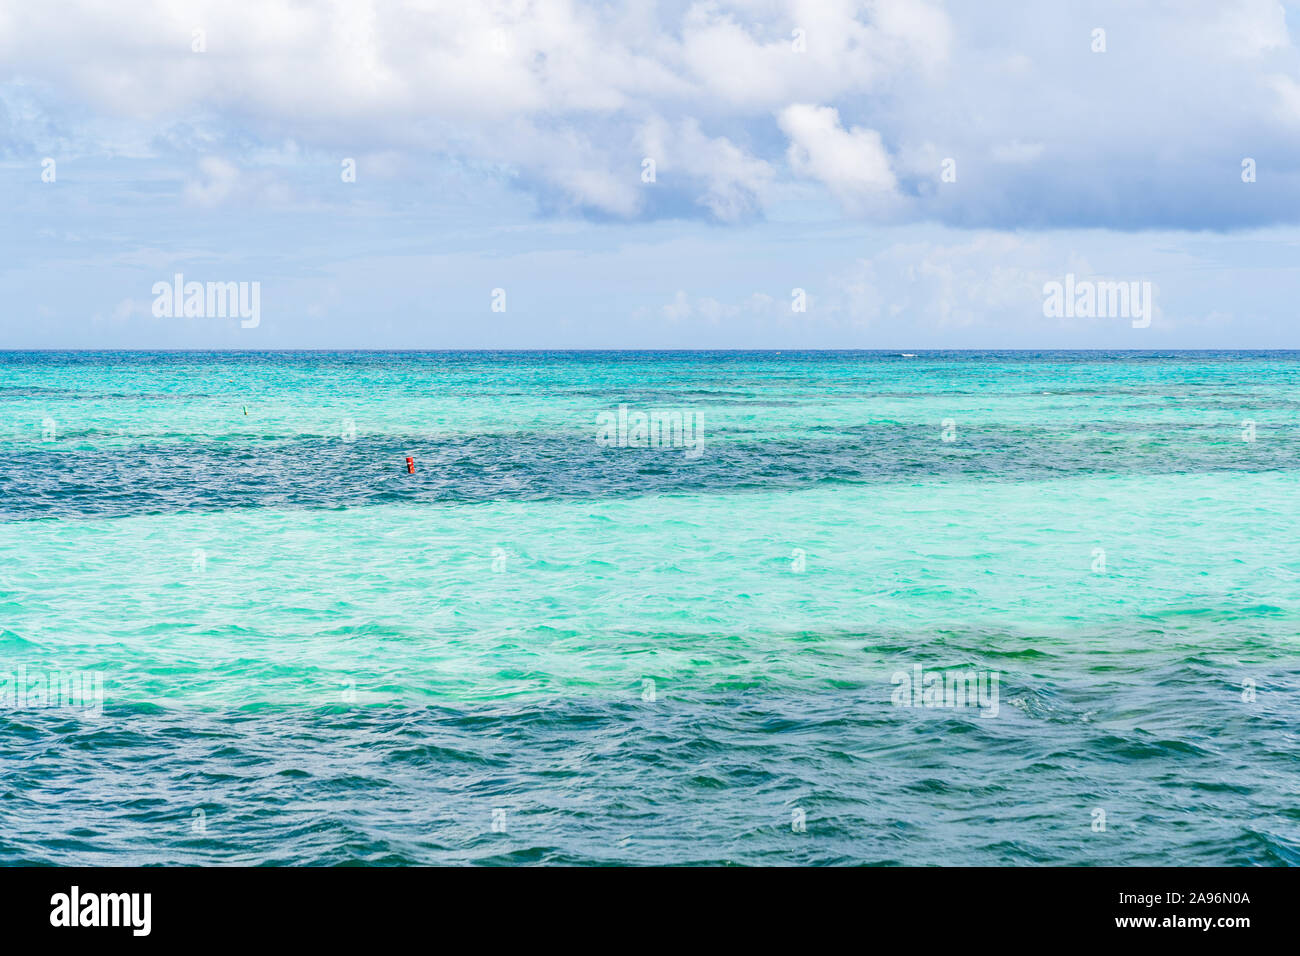 Turquoise Ocean Seascape of the Dominican Republic. Stock Photo